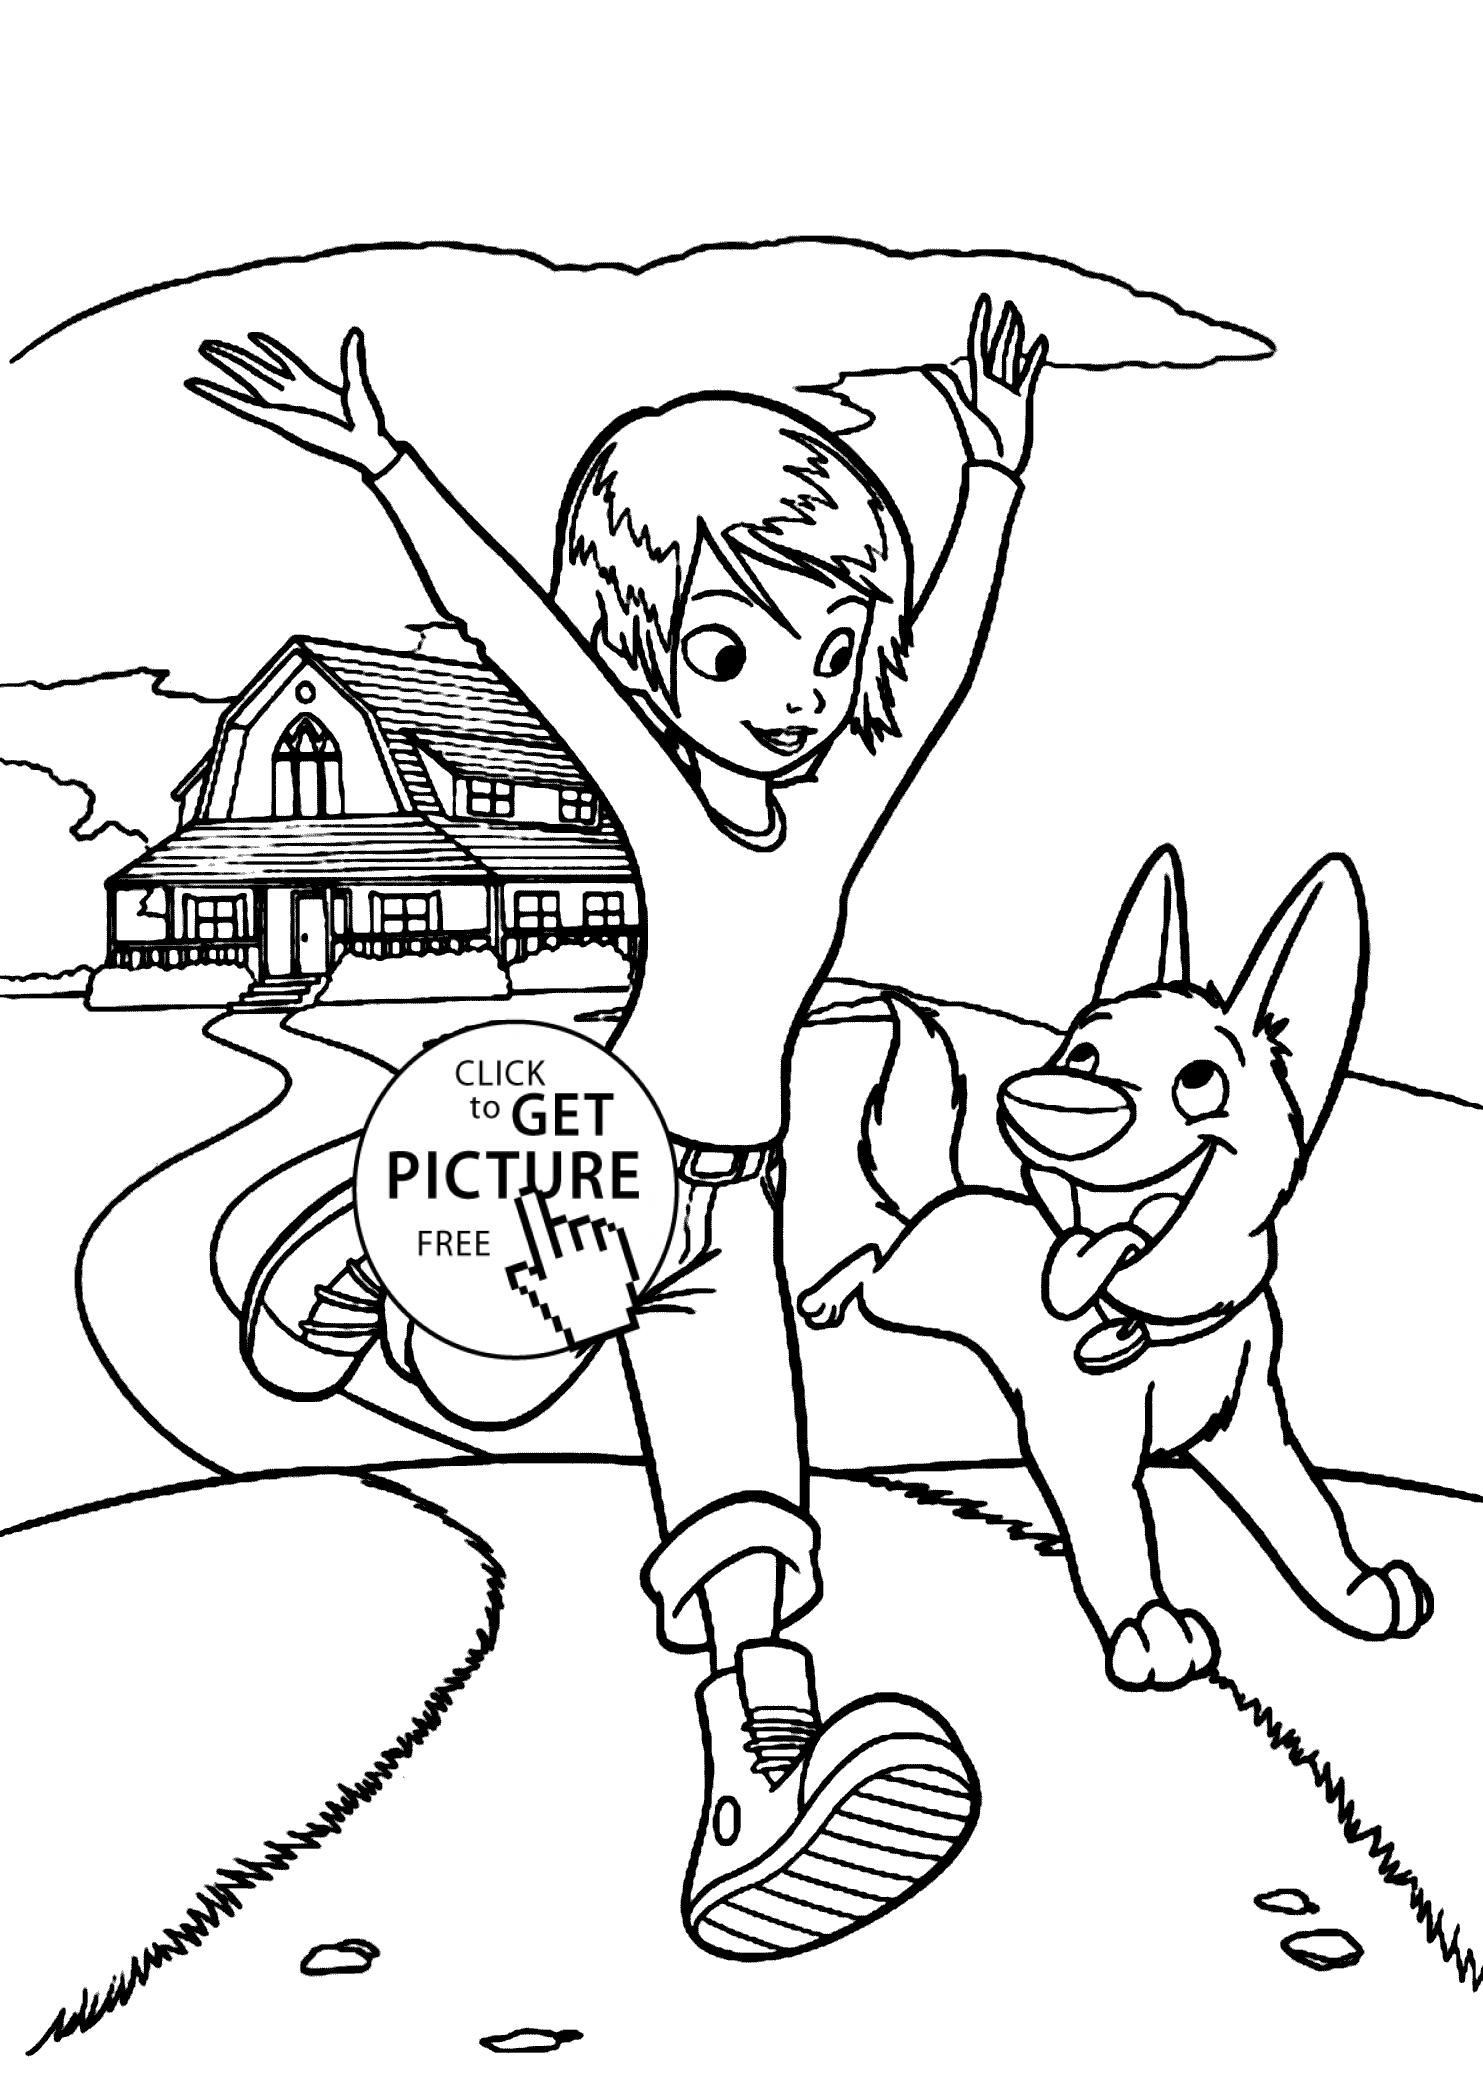 Bolt with Penny coloring pages for kids, printable free